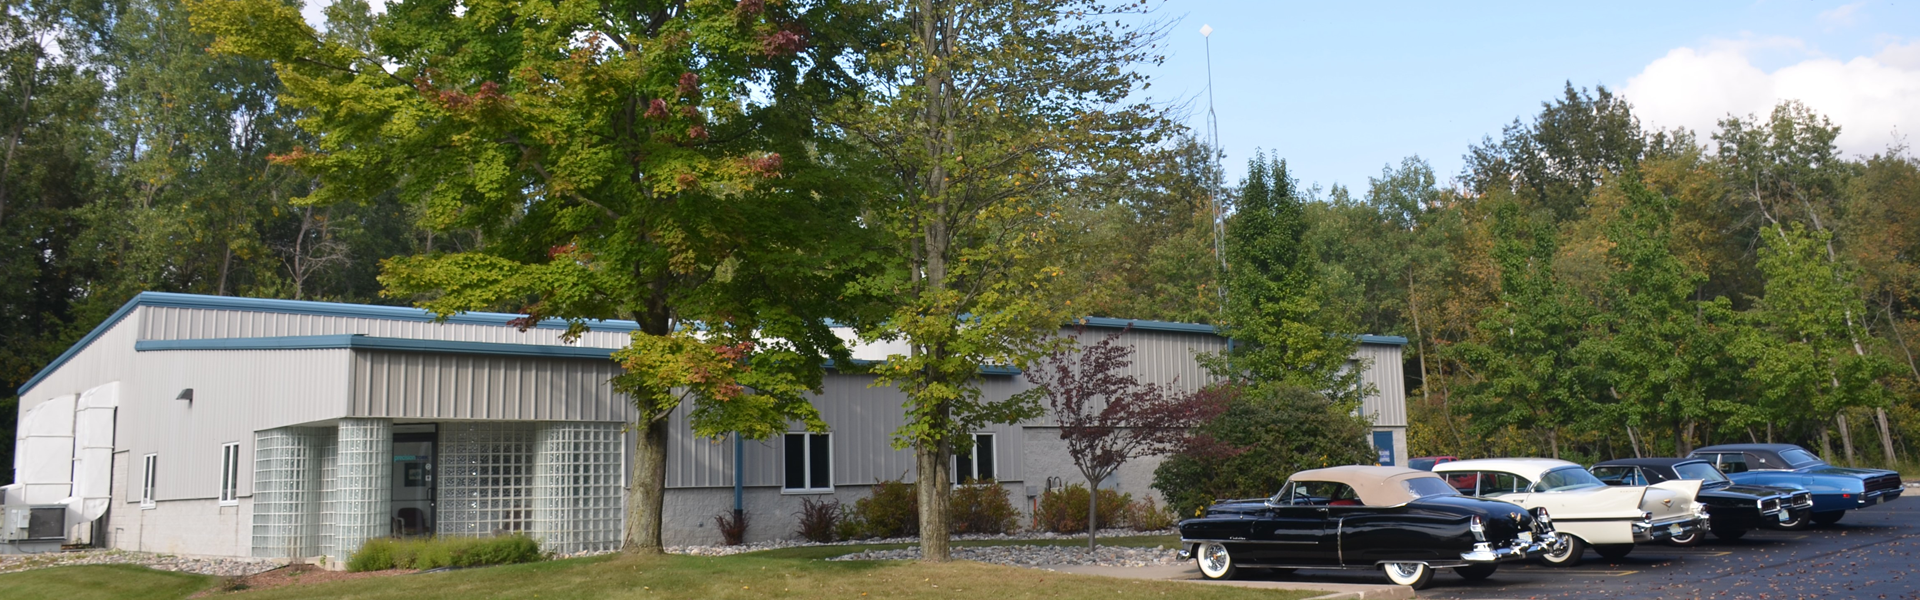 Front view of Precision Tork headquarters